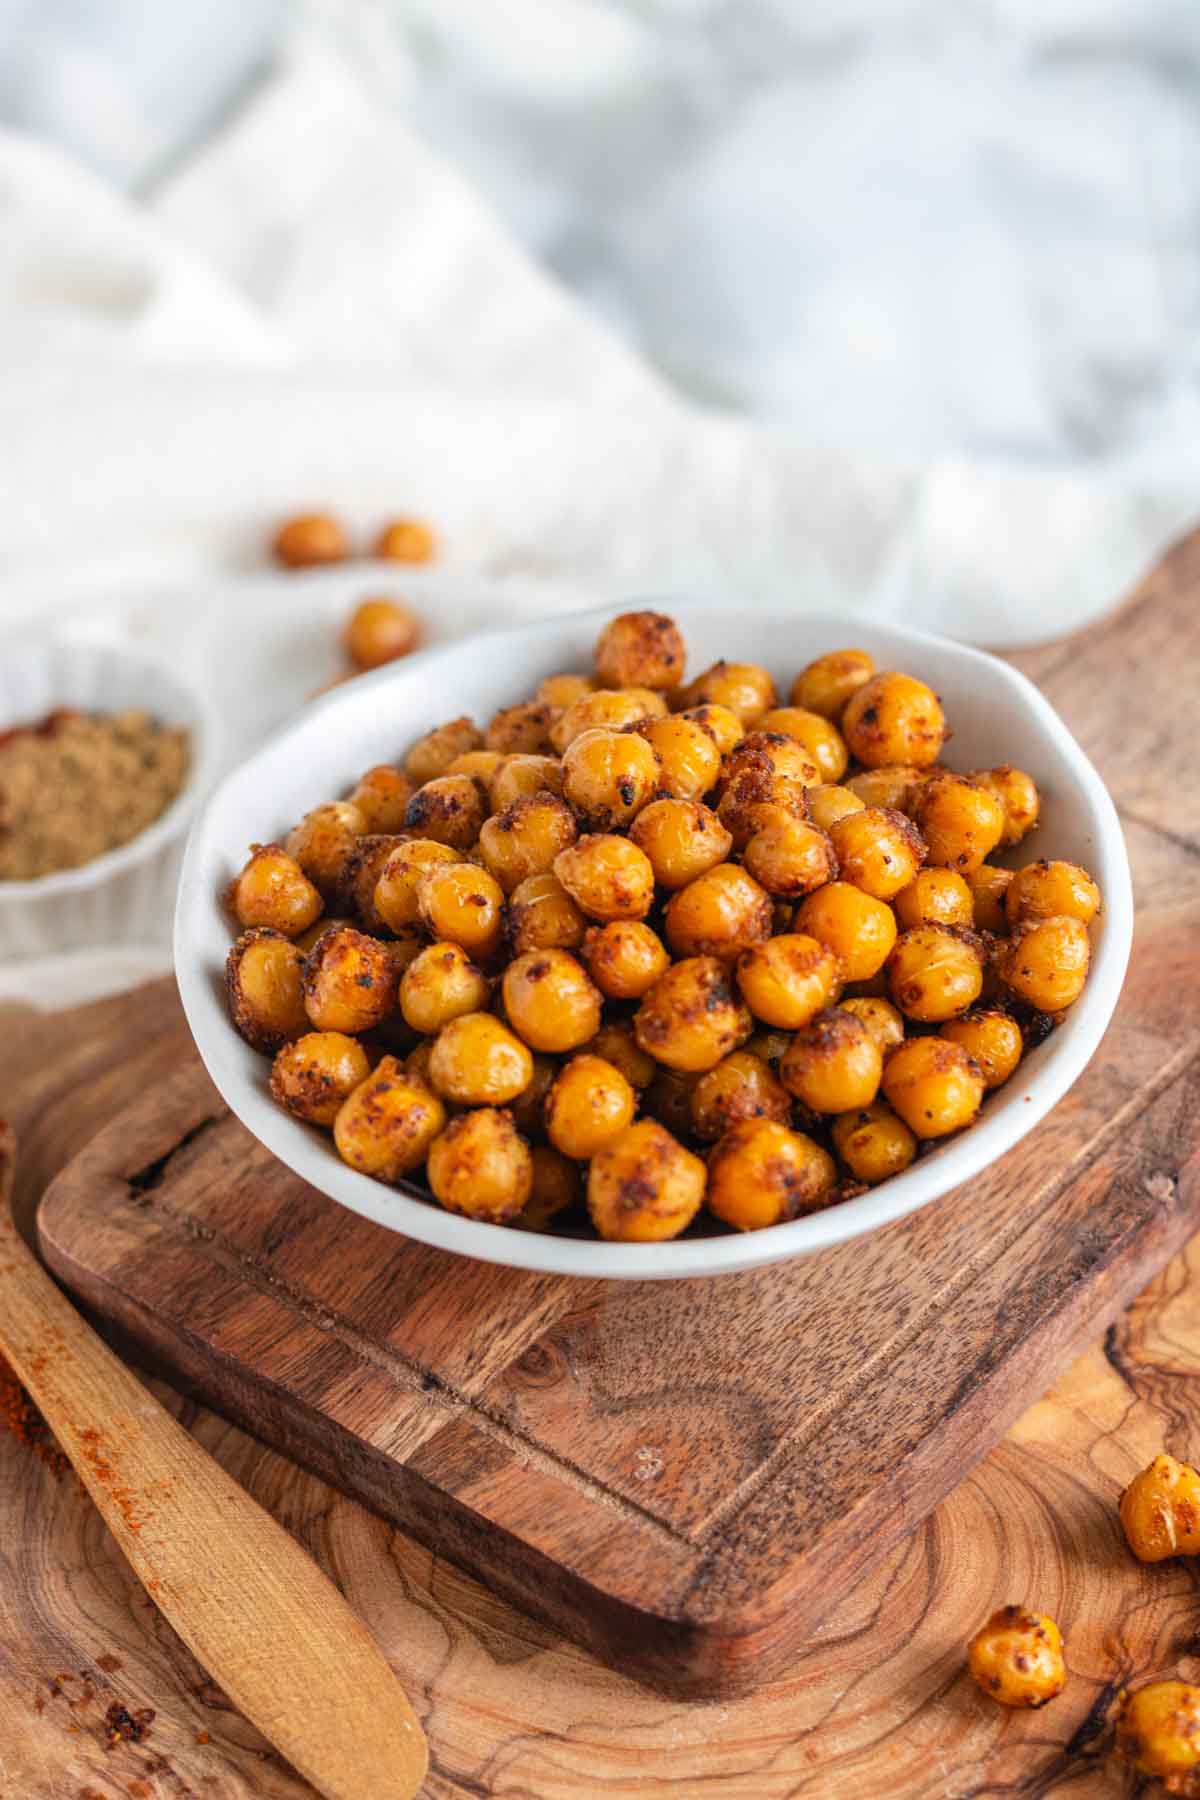 Pan fried chickpeas in a bowl on a wooden board.